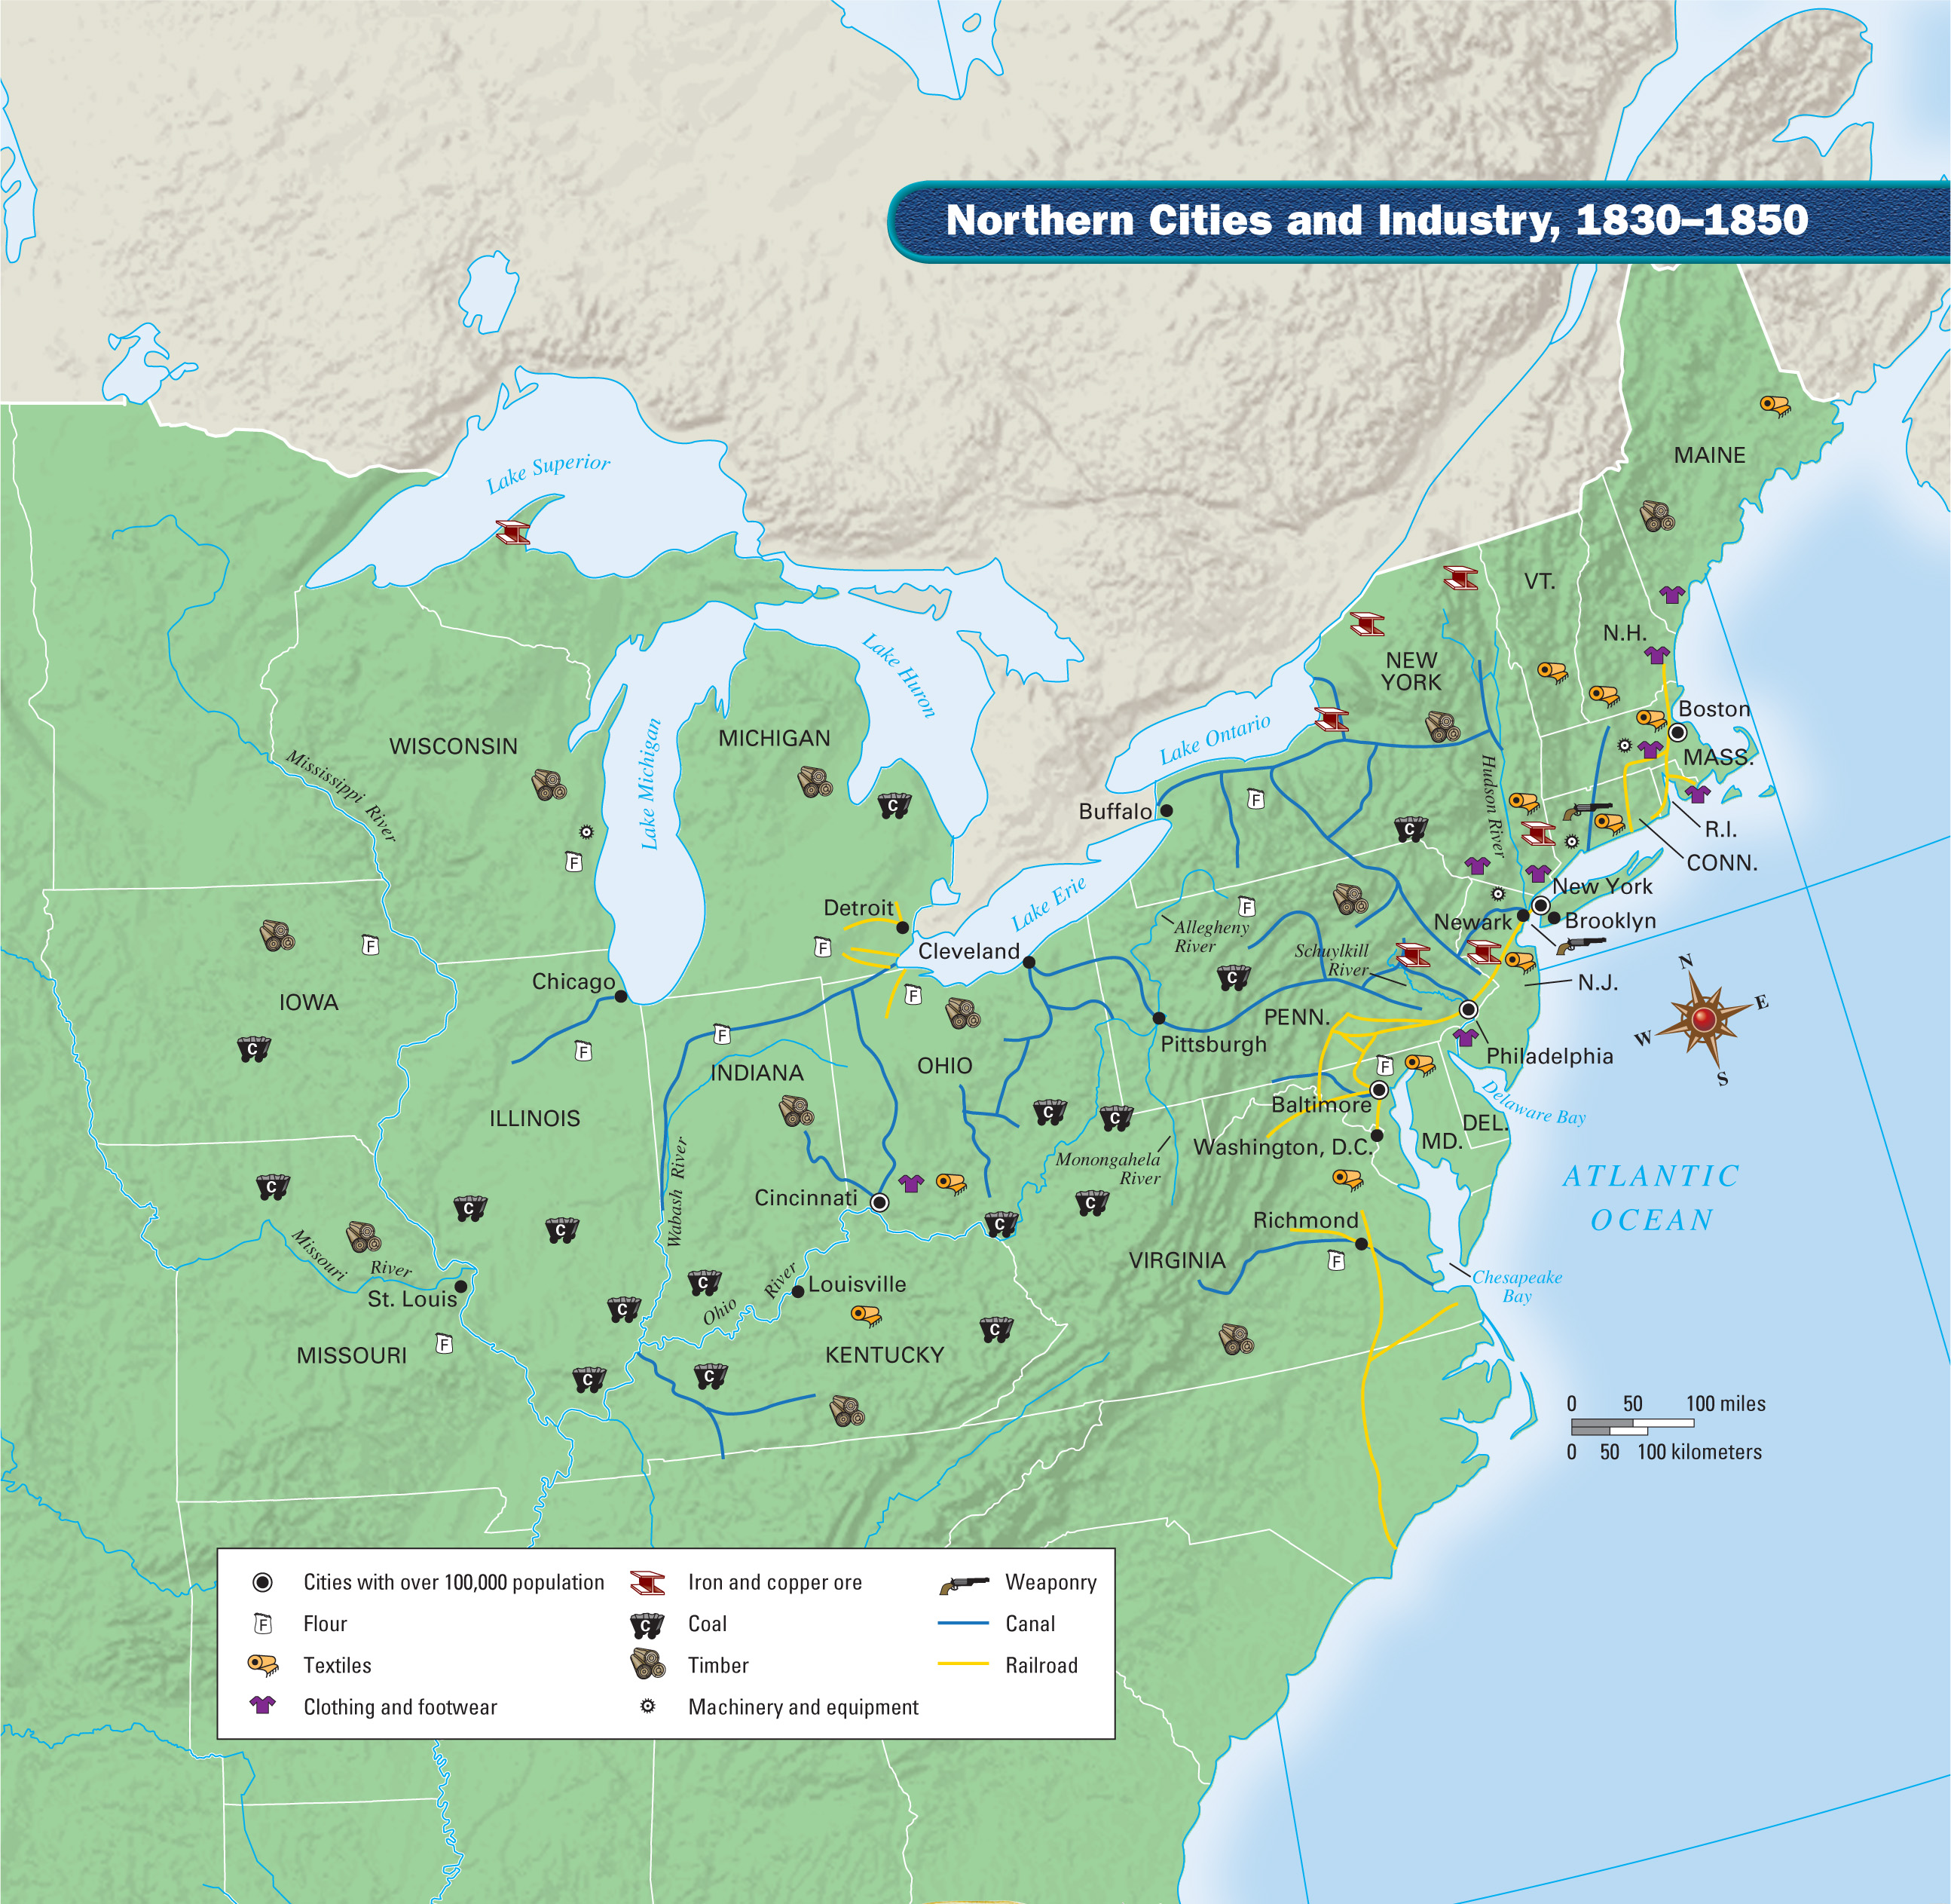 A map of northern and central U.S. shows New England and New York producing textiles, iron and copper ore, and clothing and footwear. Pennsylvania and the midwestern states primarily produce coal, flour, and timber.